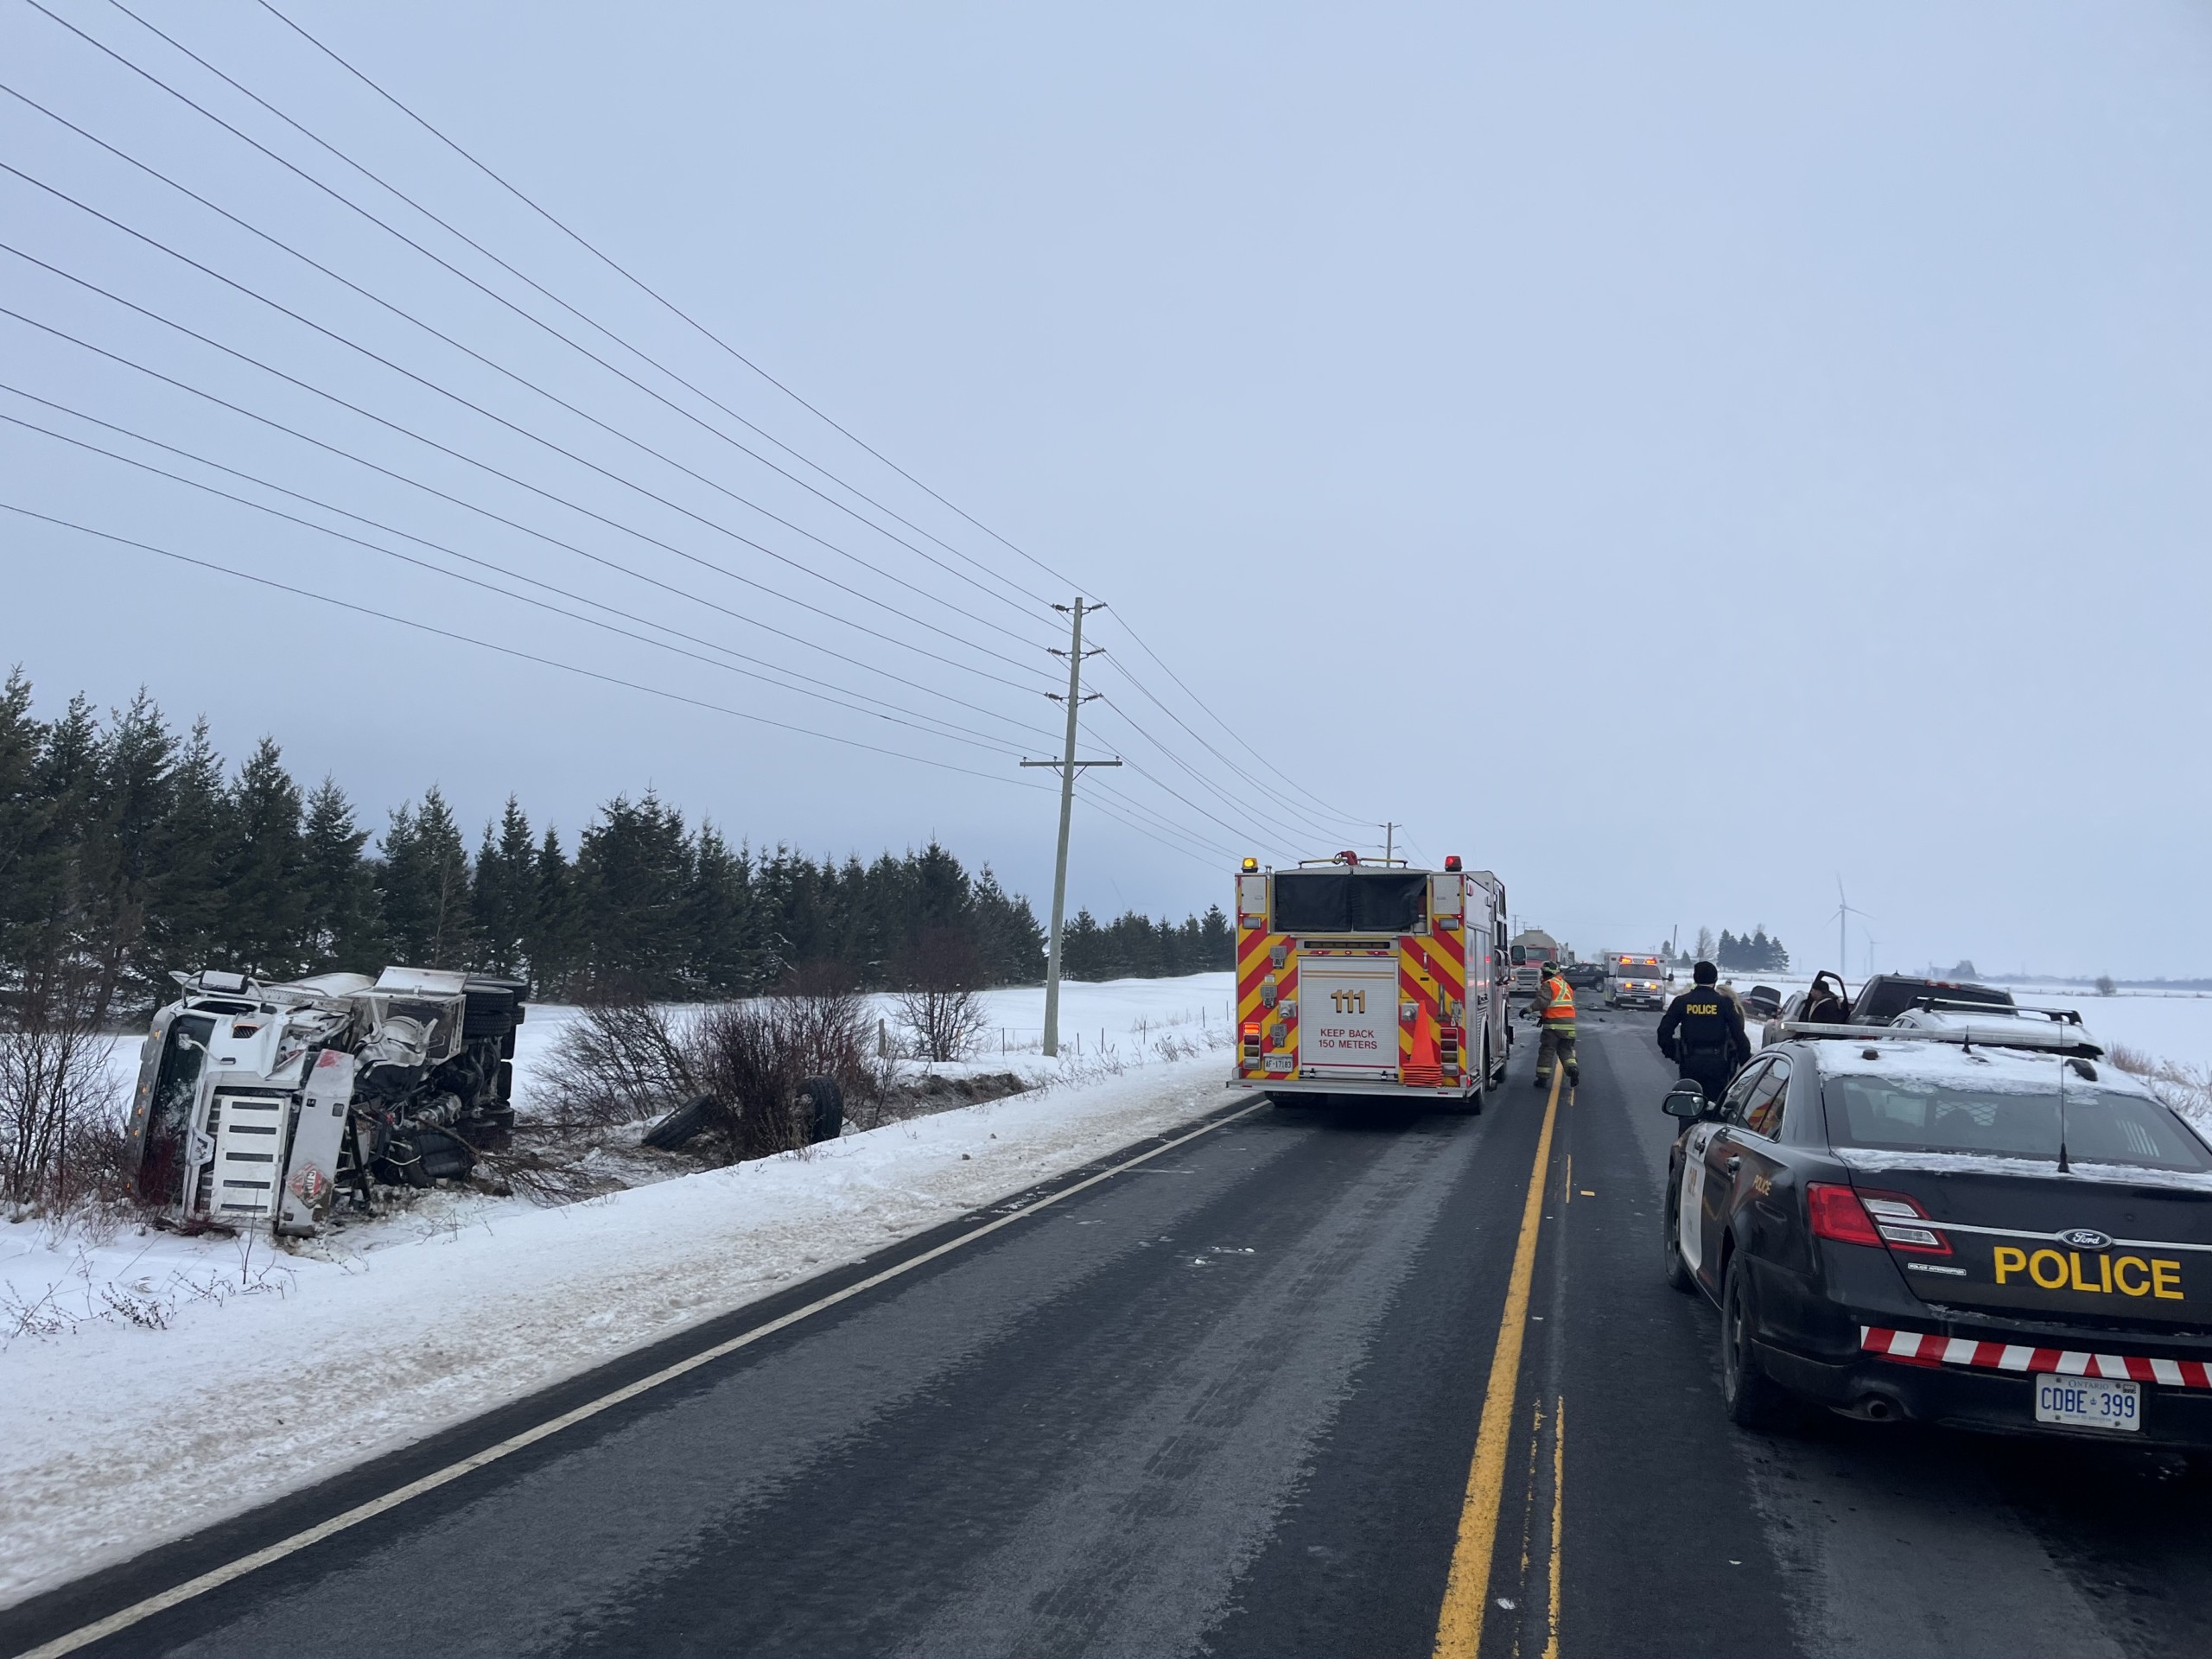 Highway 21 crash victim airlifted with serious injuries